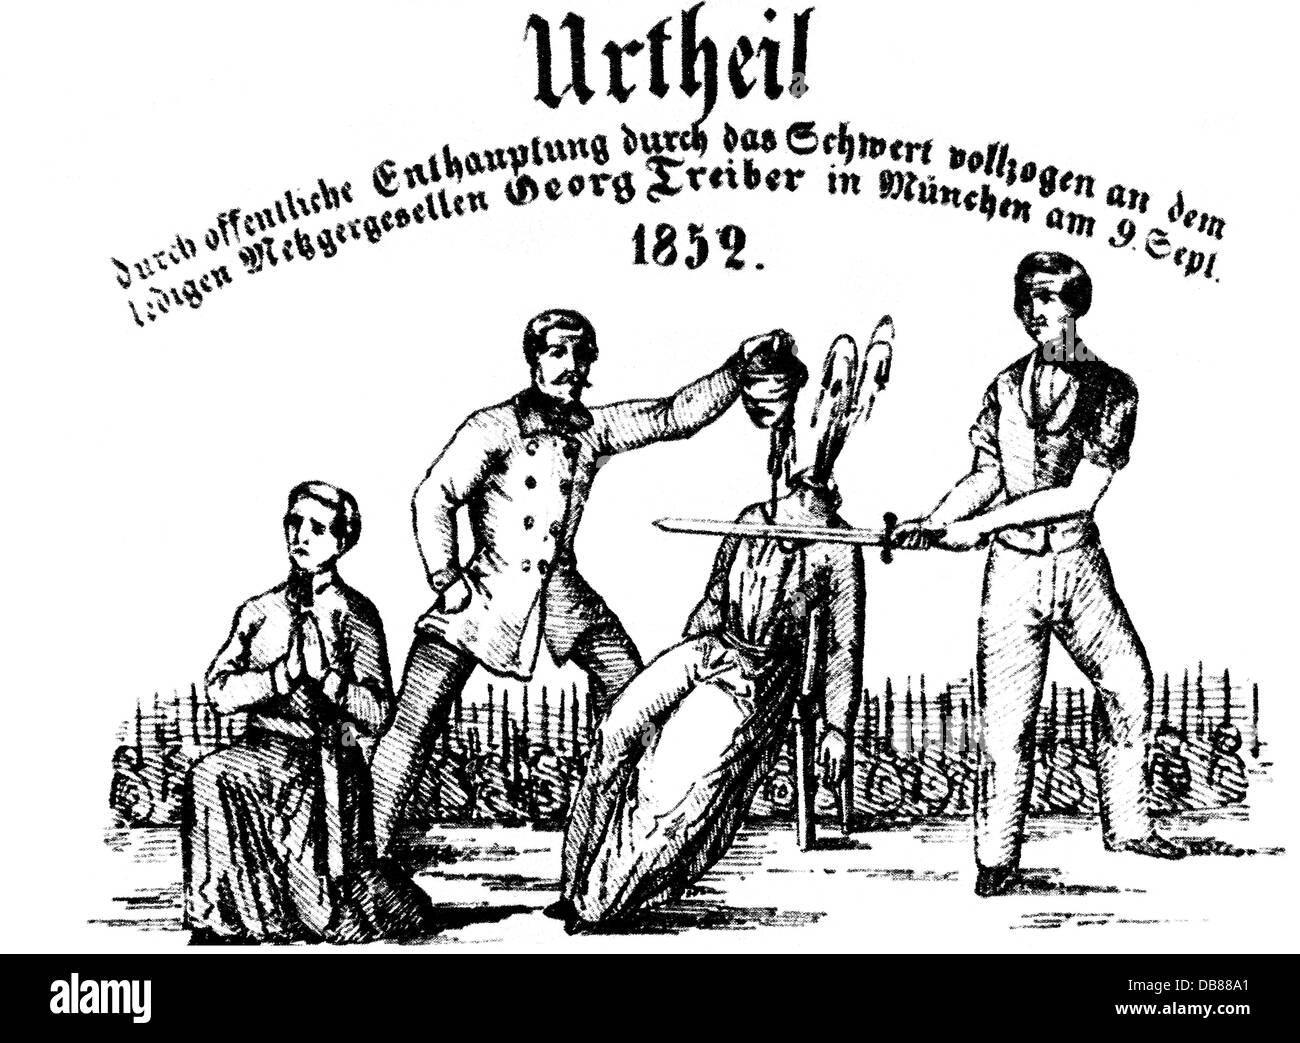 justice, penitentiary system, beheading, public execution of the butcher's apprentice Georg Treiber for murder with robbery, Munich, 9.9.1852, Additional-Rights-Clearences-Not Available Stock Photo